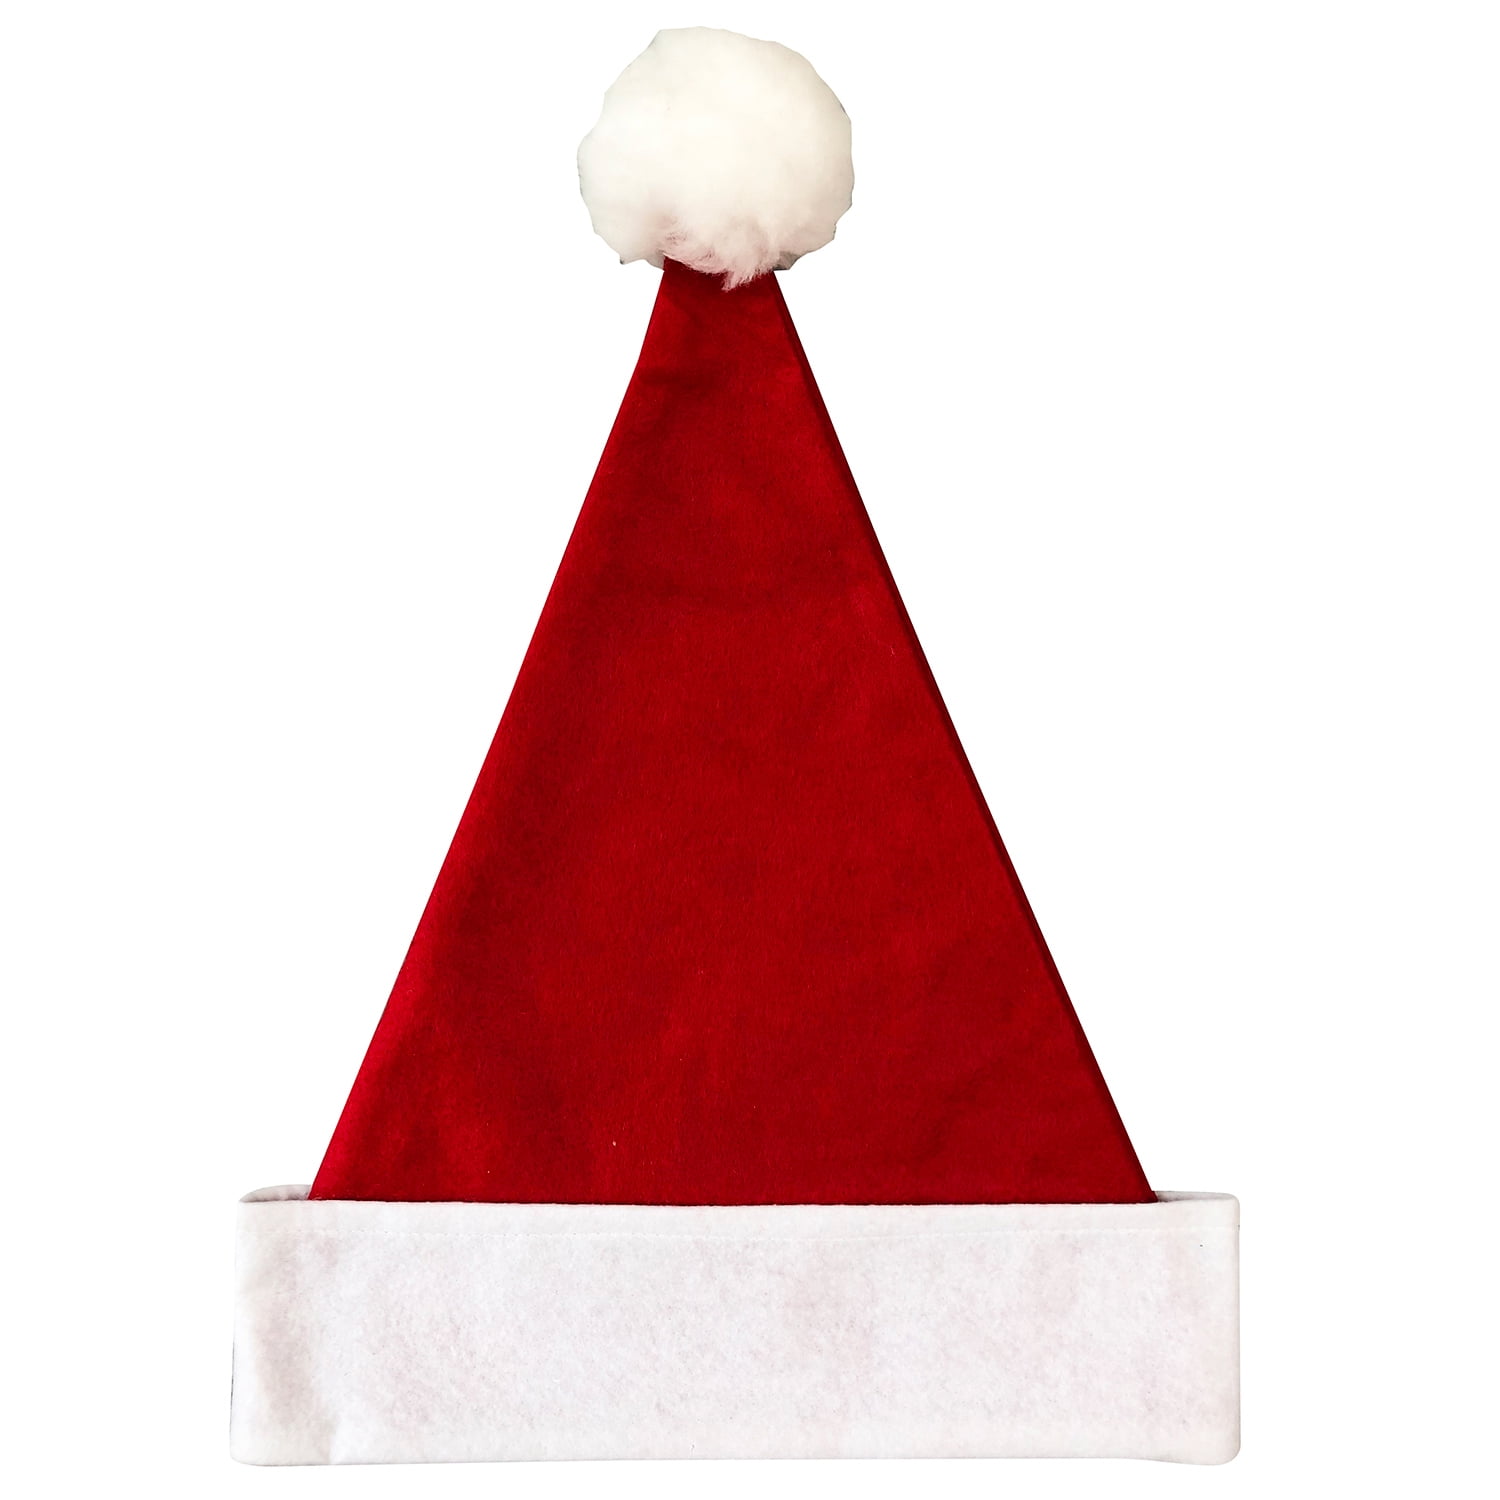 Holiday Time Felt Red Traditional Style Santa Hat, Medium, 17Inx12In, Adult & Unisex